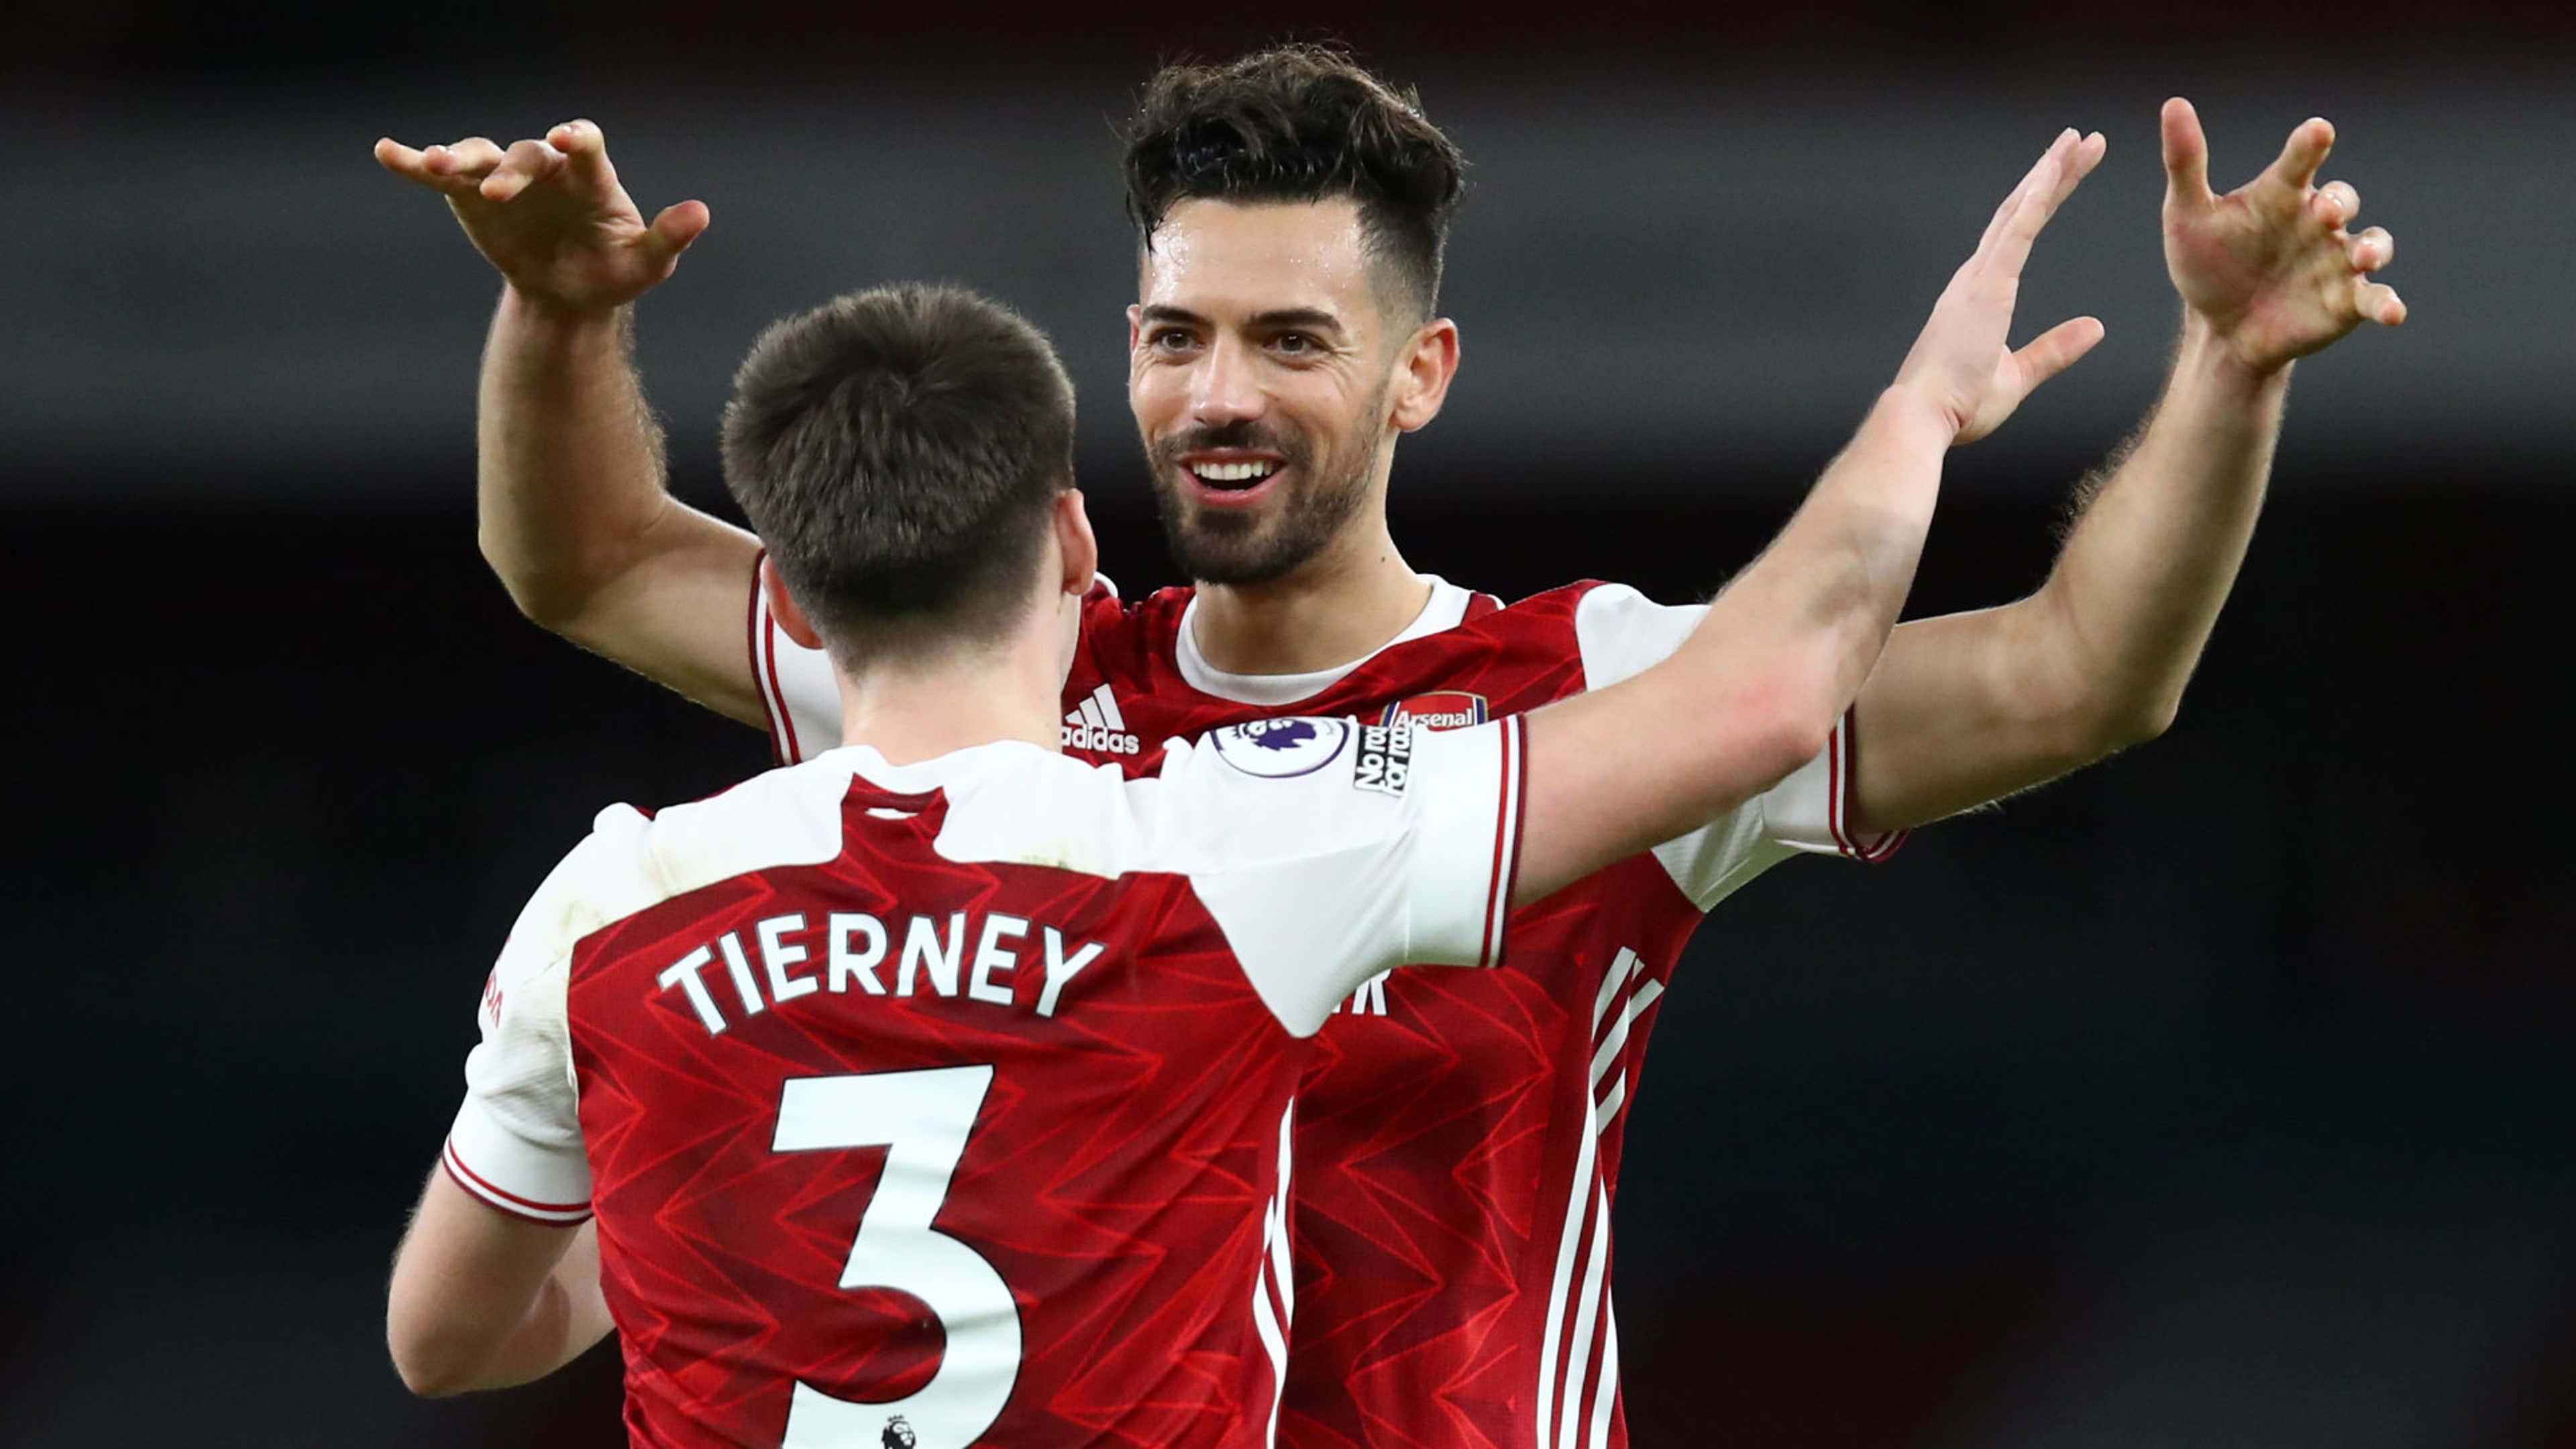 Is Kieran Tierney too good to sit on the Arsenal bench? - Just Arsenal News